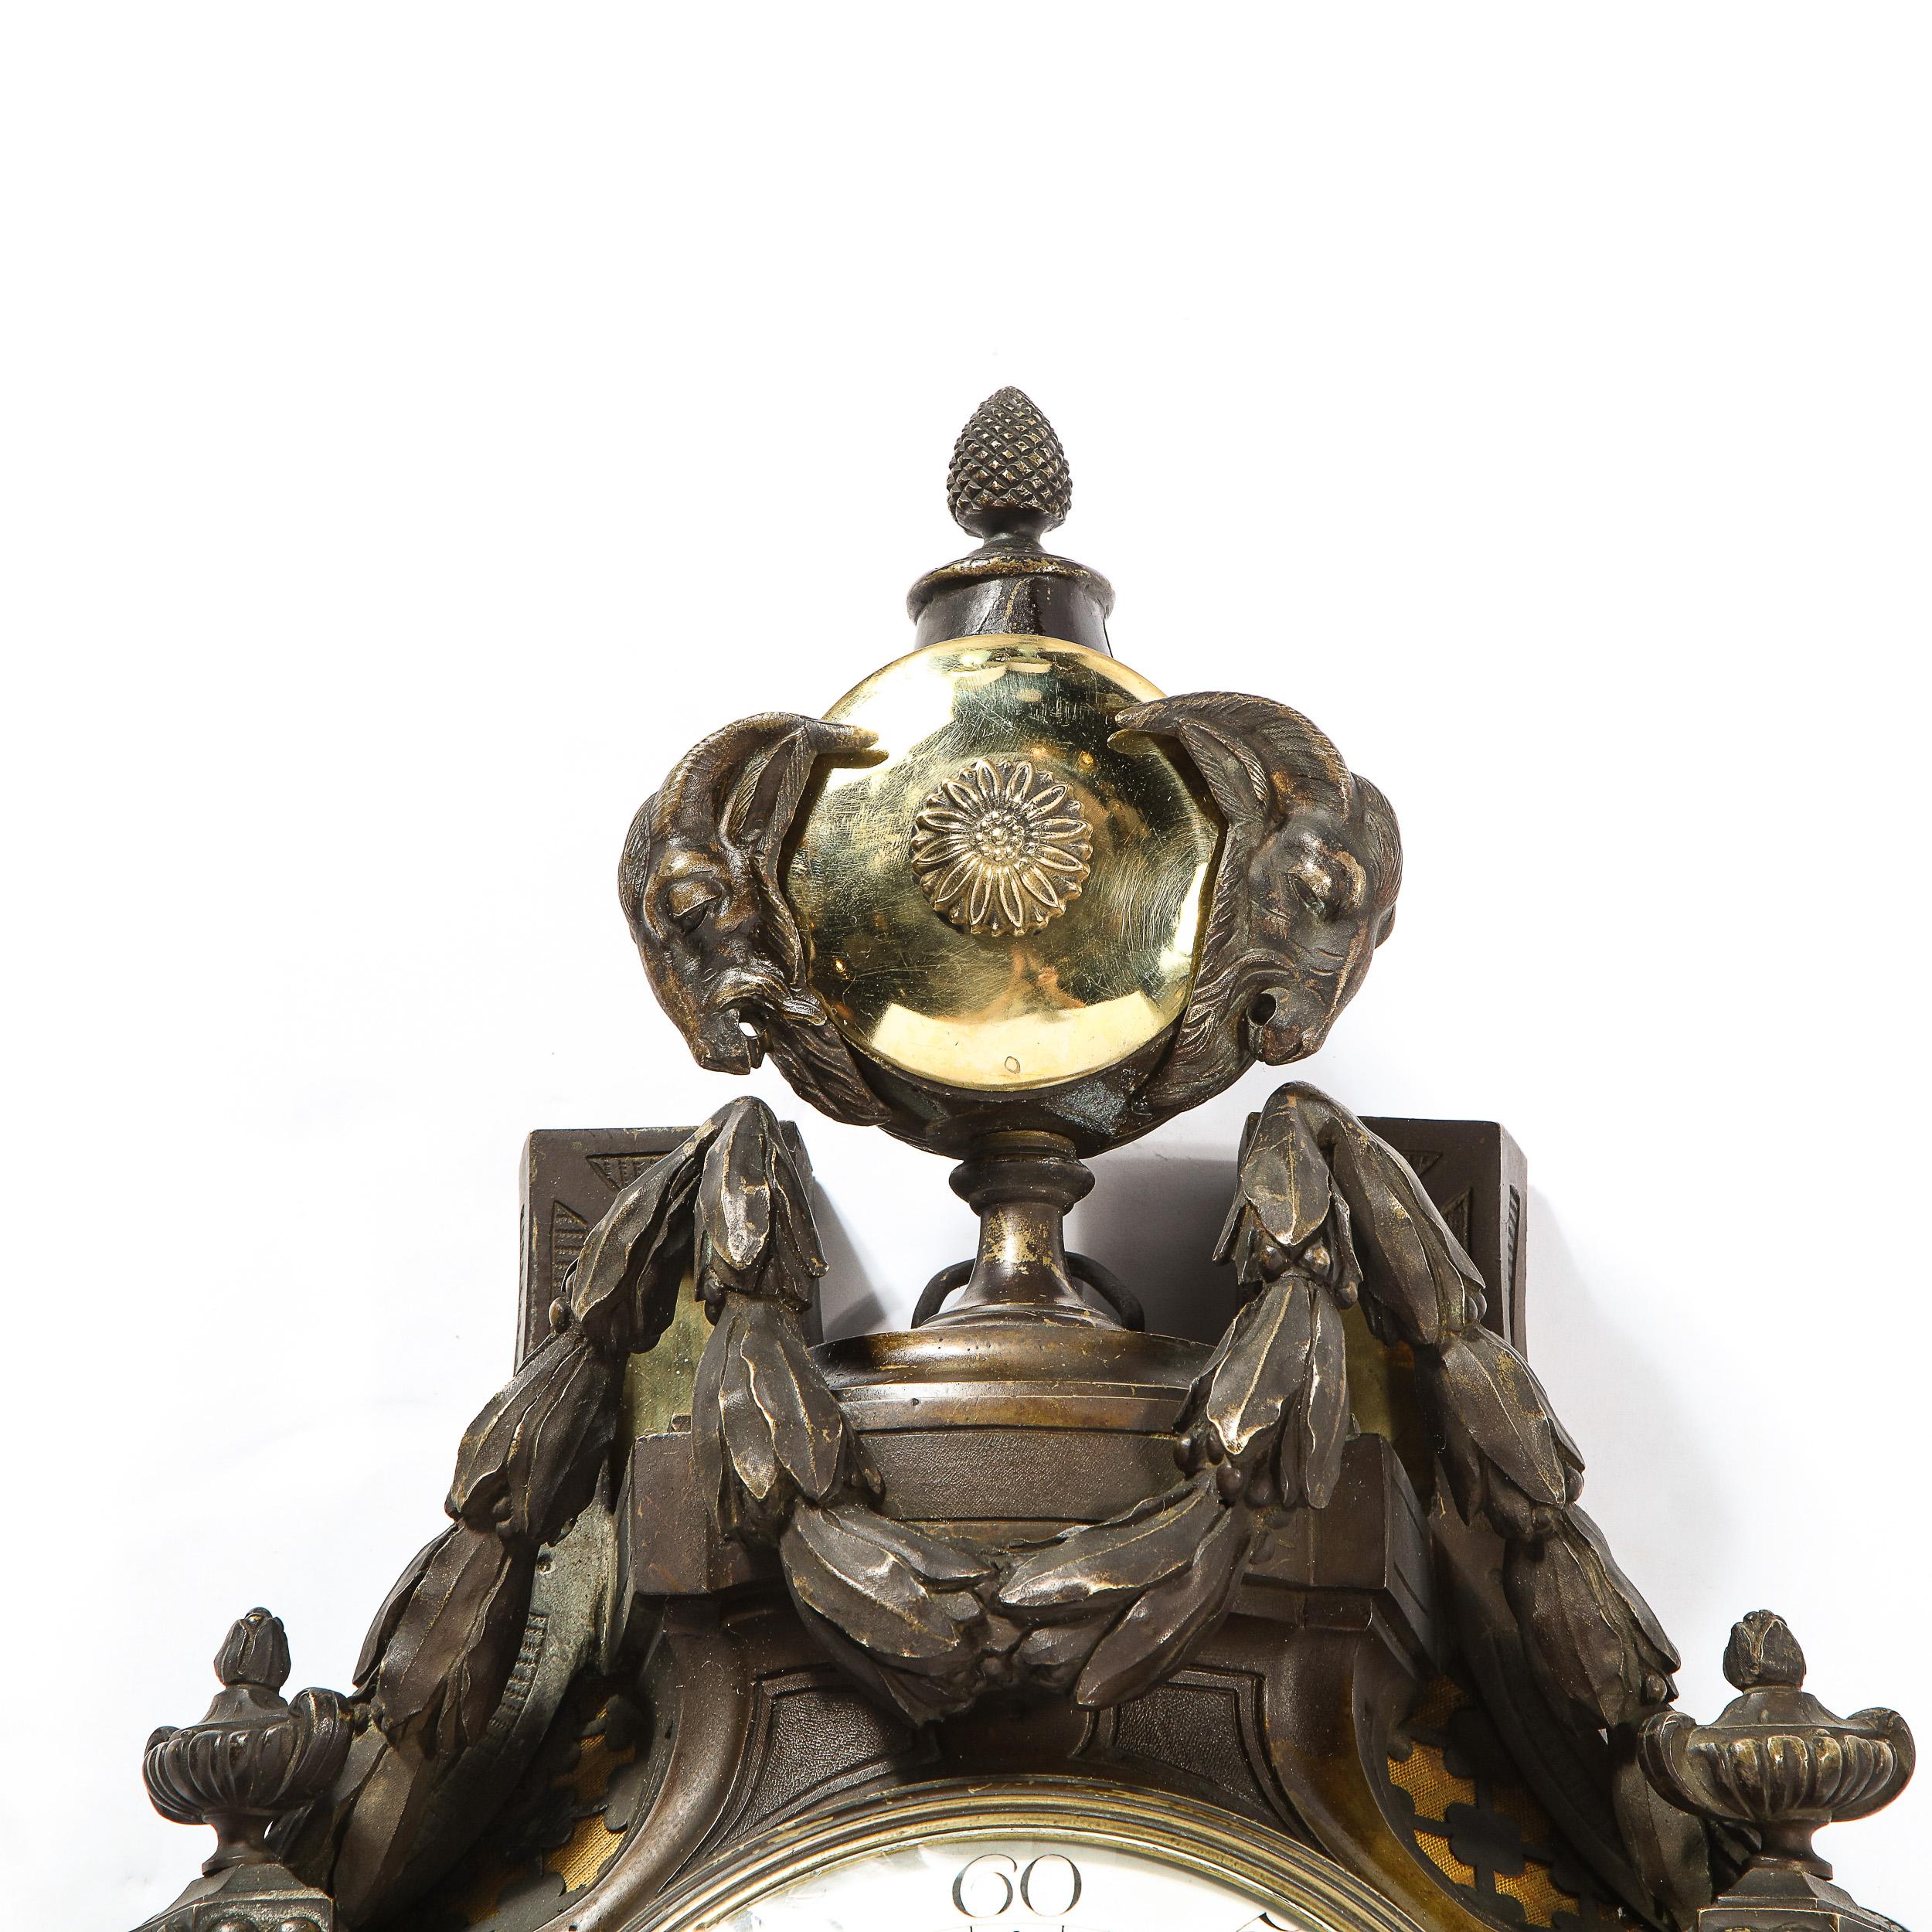 French 18th Century Neoclassical Bronze & Polished Brass Wall Clock w/ Chime by Caron